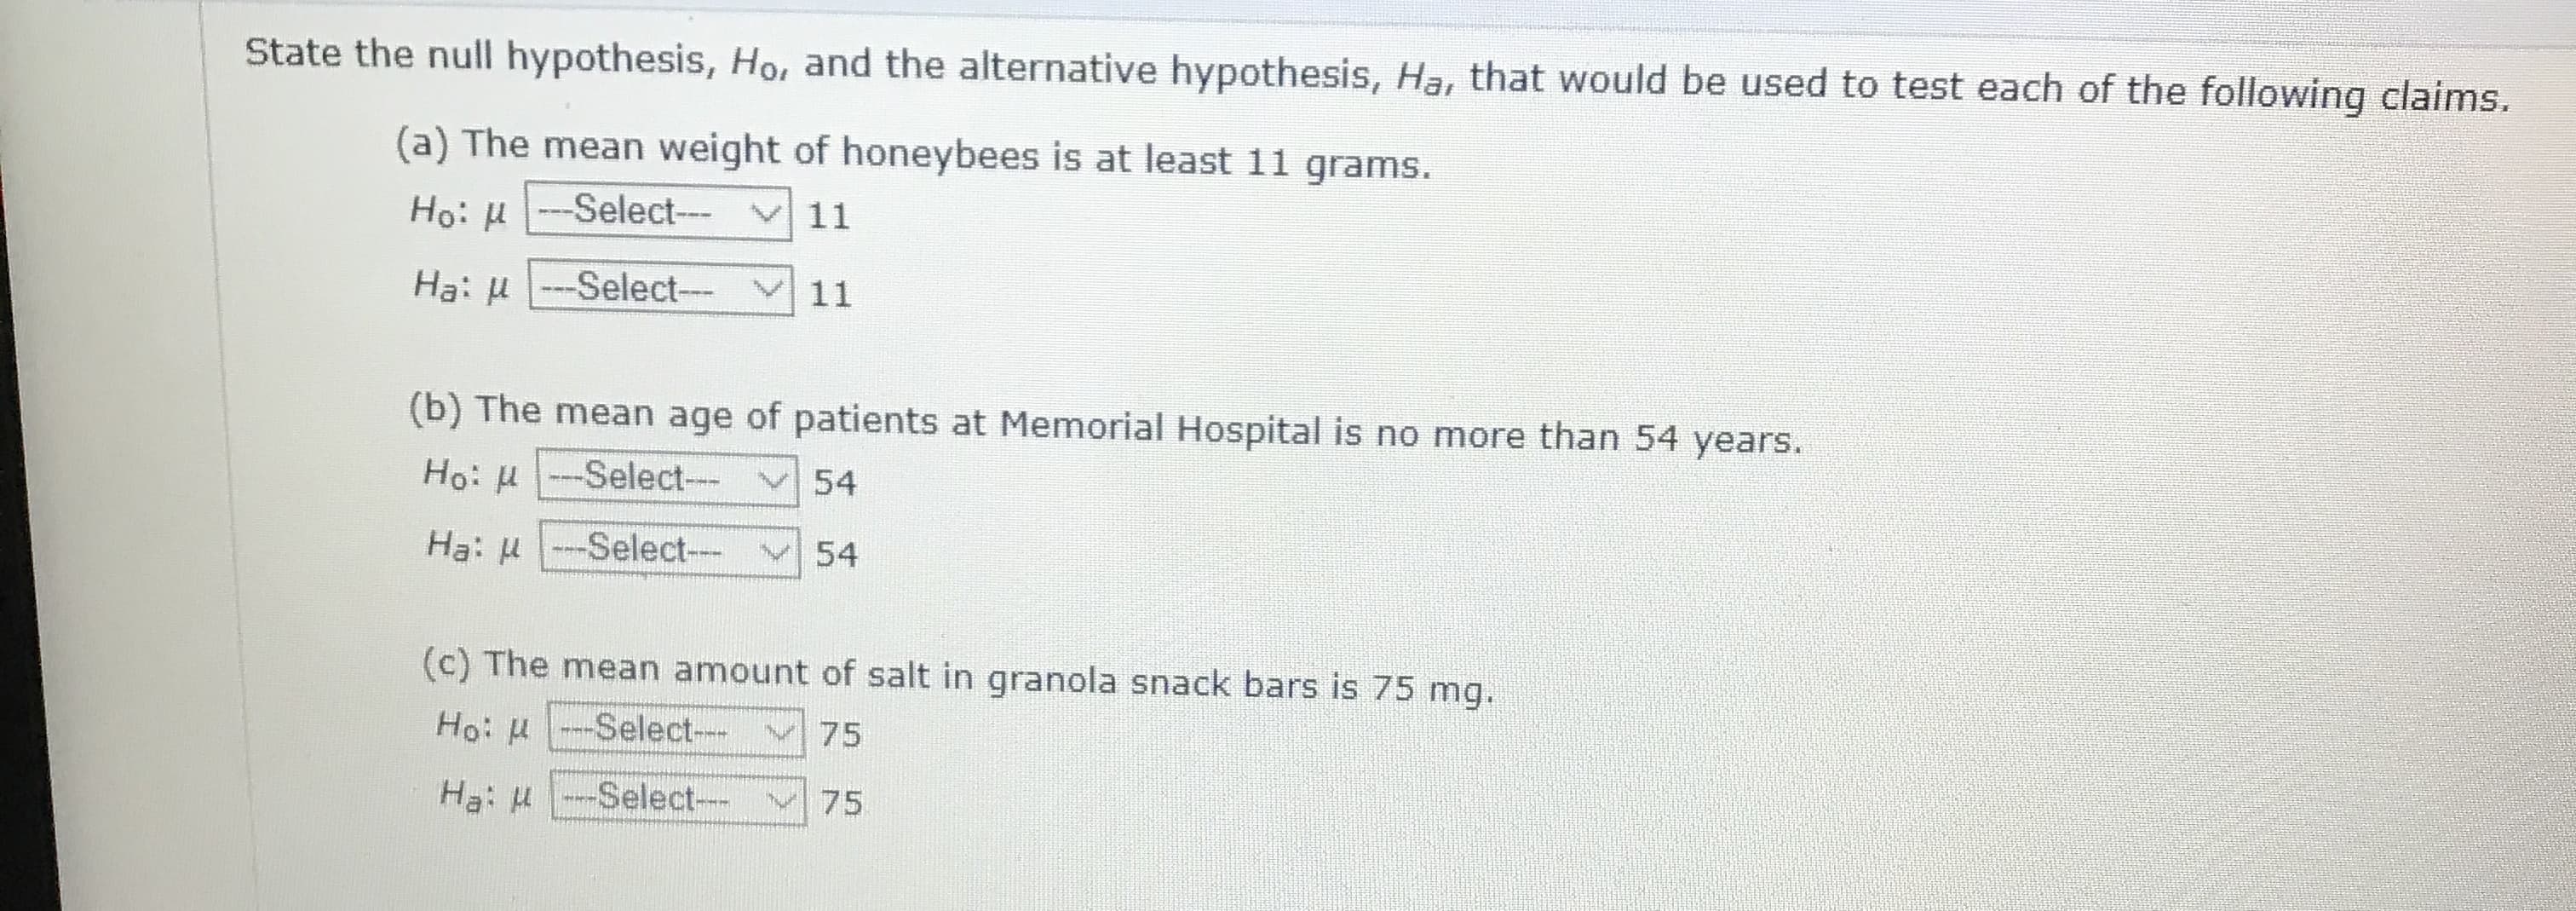 State the null hypothesis, Ho, and the alternative hypothesis, Ha, that would be used to test each of the following claims.
(a) The mean weight of honeybees is at least 11 grams.
Ho: u-Select---
11
Ha: u -Select---
11
(b) The mean age of patients at Memorial Hospital is no more than 54 years.
Ho: u ---Select--
54
Ha: u --Select---
54
(c) The mean amount of salt in granola snack bars is 75 mg.
Ho: u -Select---
V75
Ha: M
-Select-- v75
